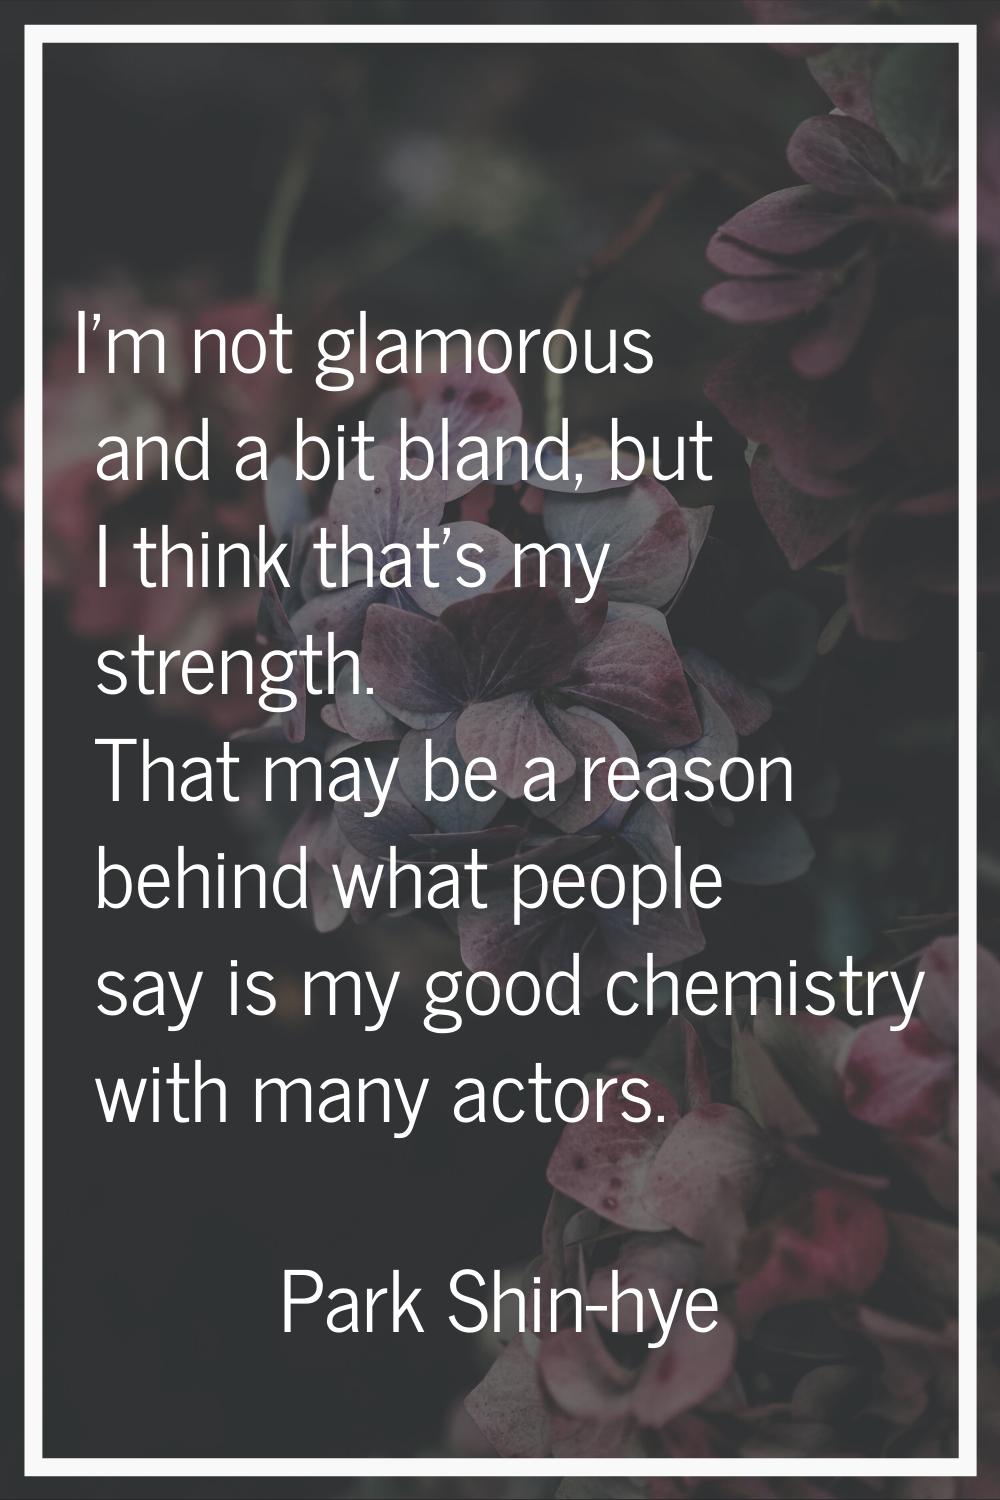 I'm not glamorous and a bit bland, but I think that's my strength. That may be a reason behind what